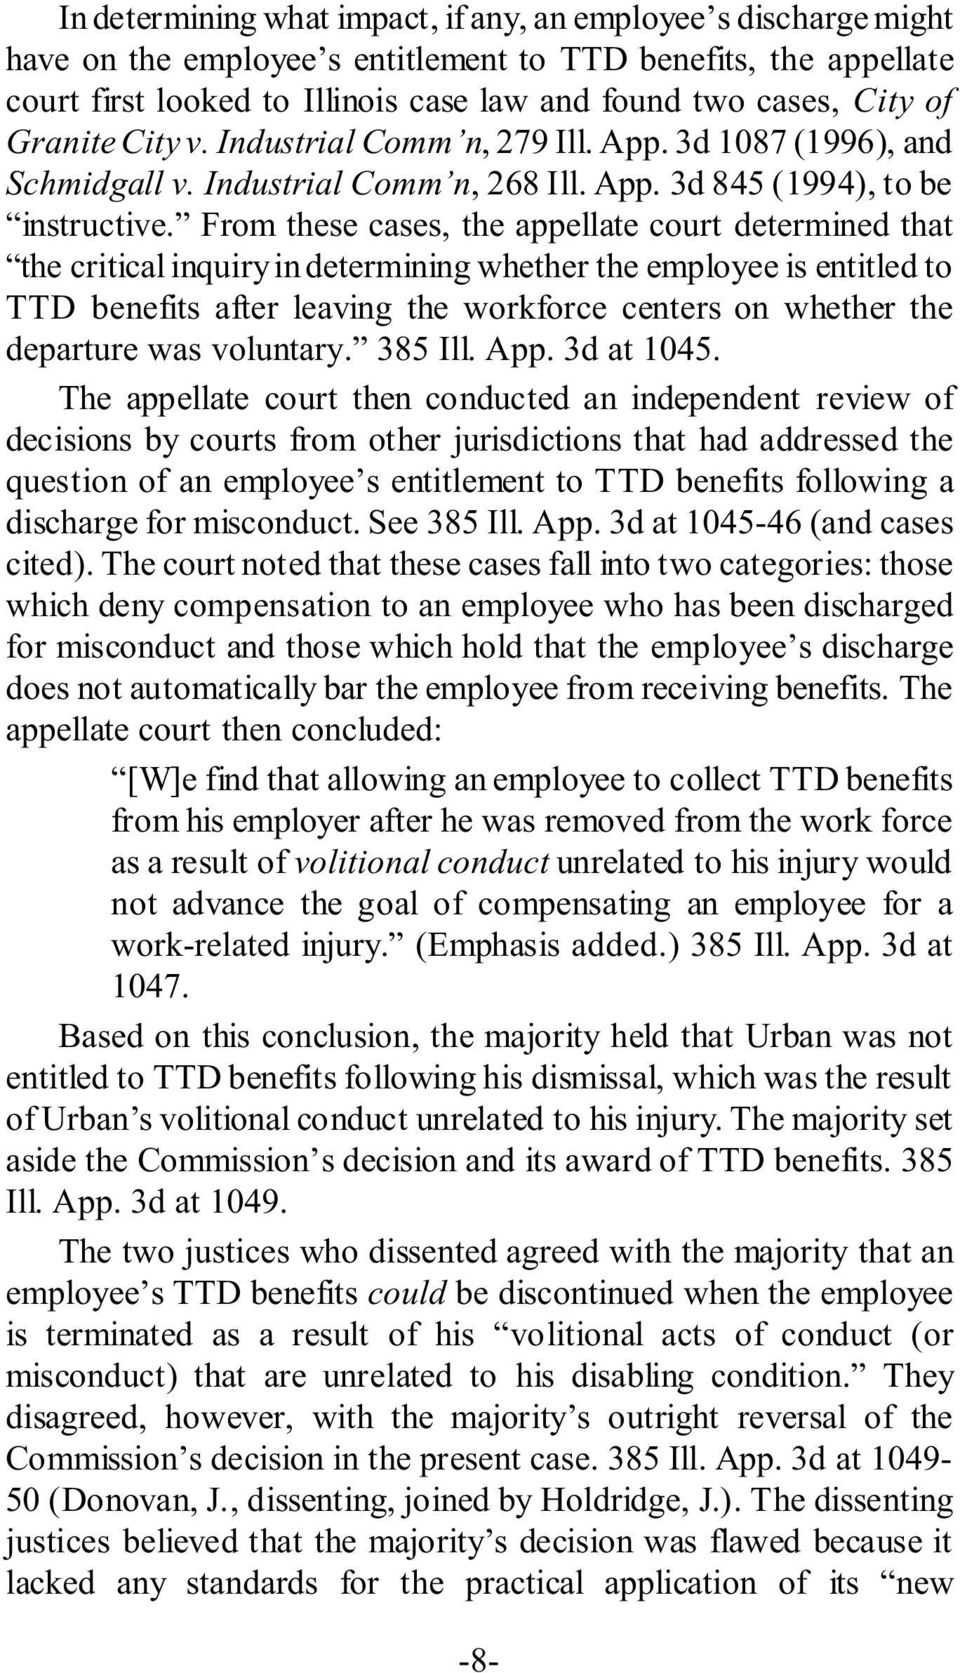 From these cases, the appellate court determined that the critical inquiry in determining whether the employee is entitled to TTD benefits after leaving the workforce centers on whether the departure